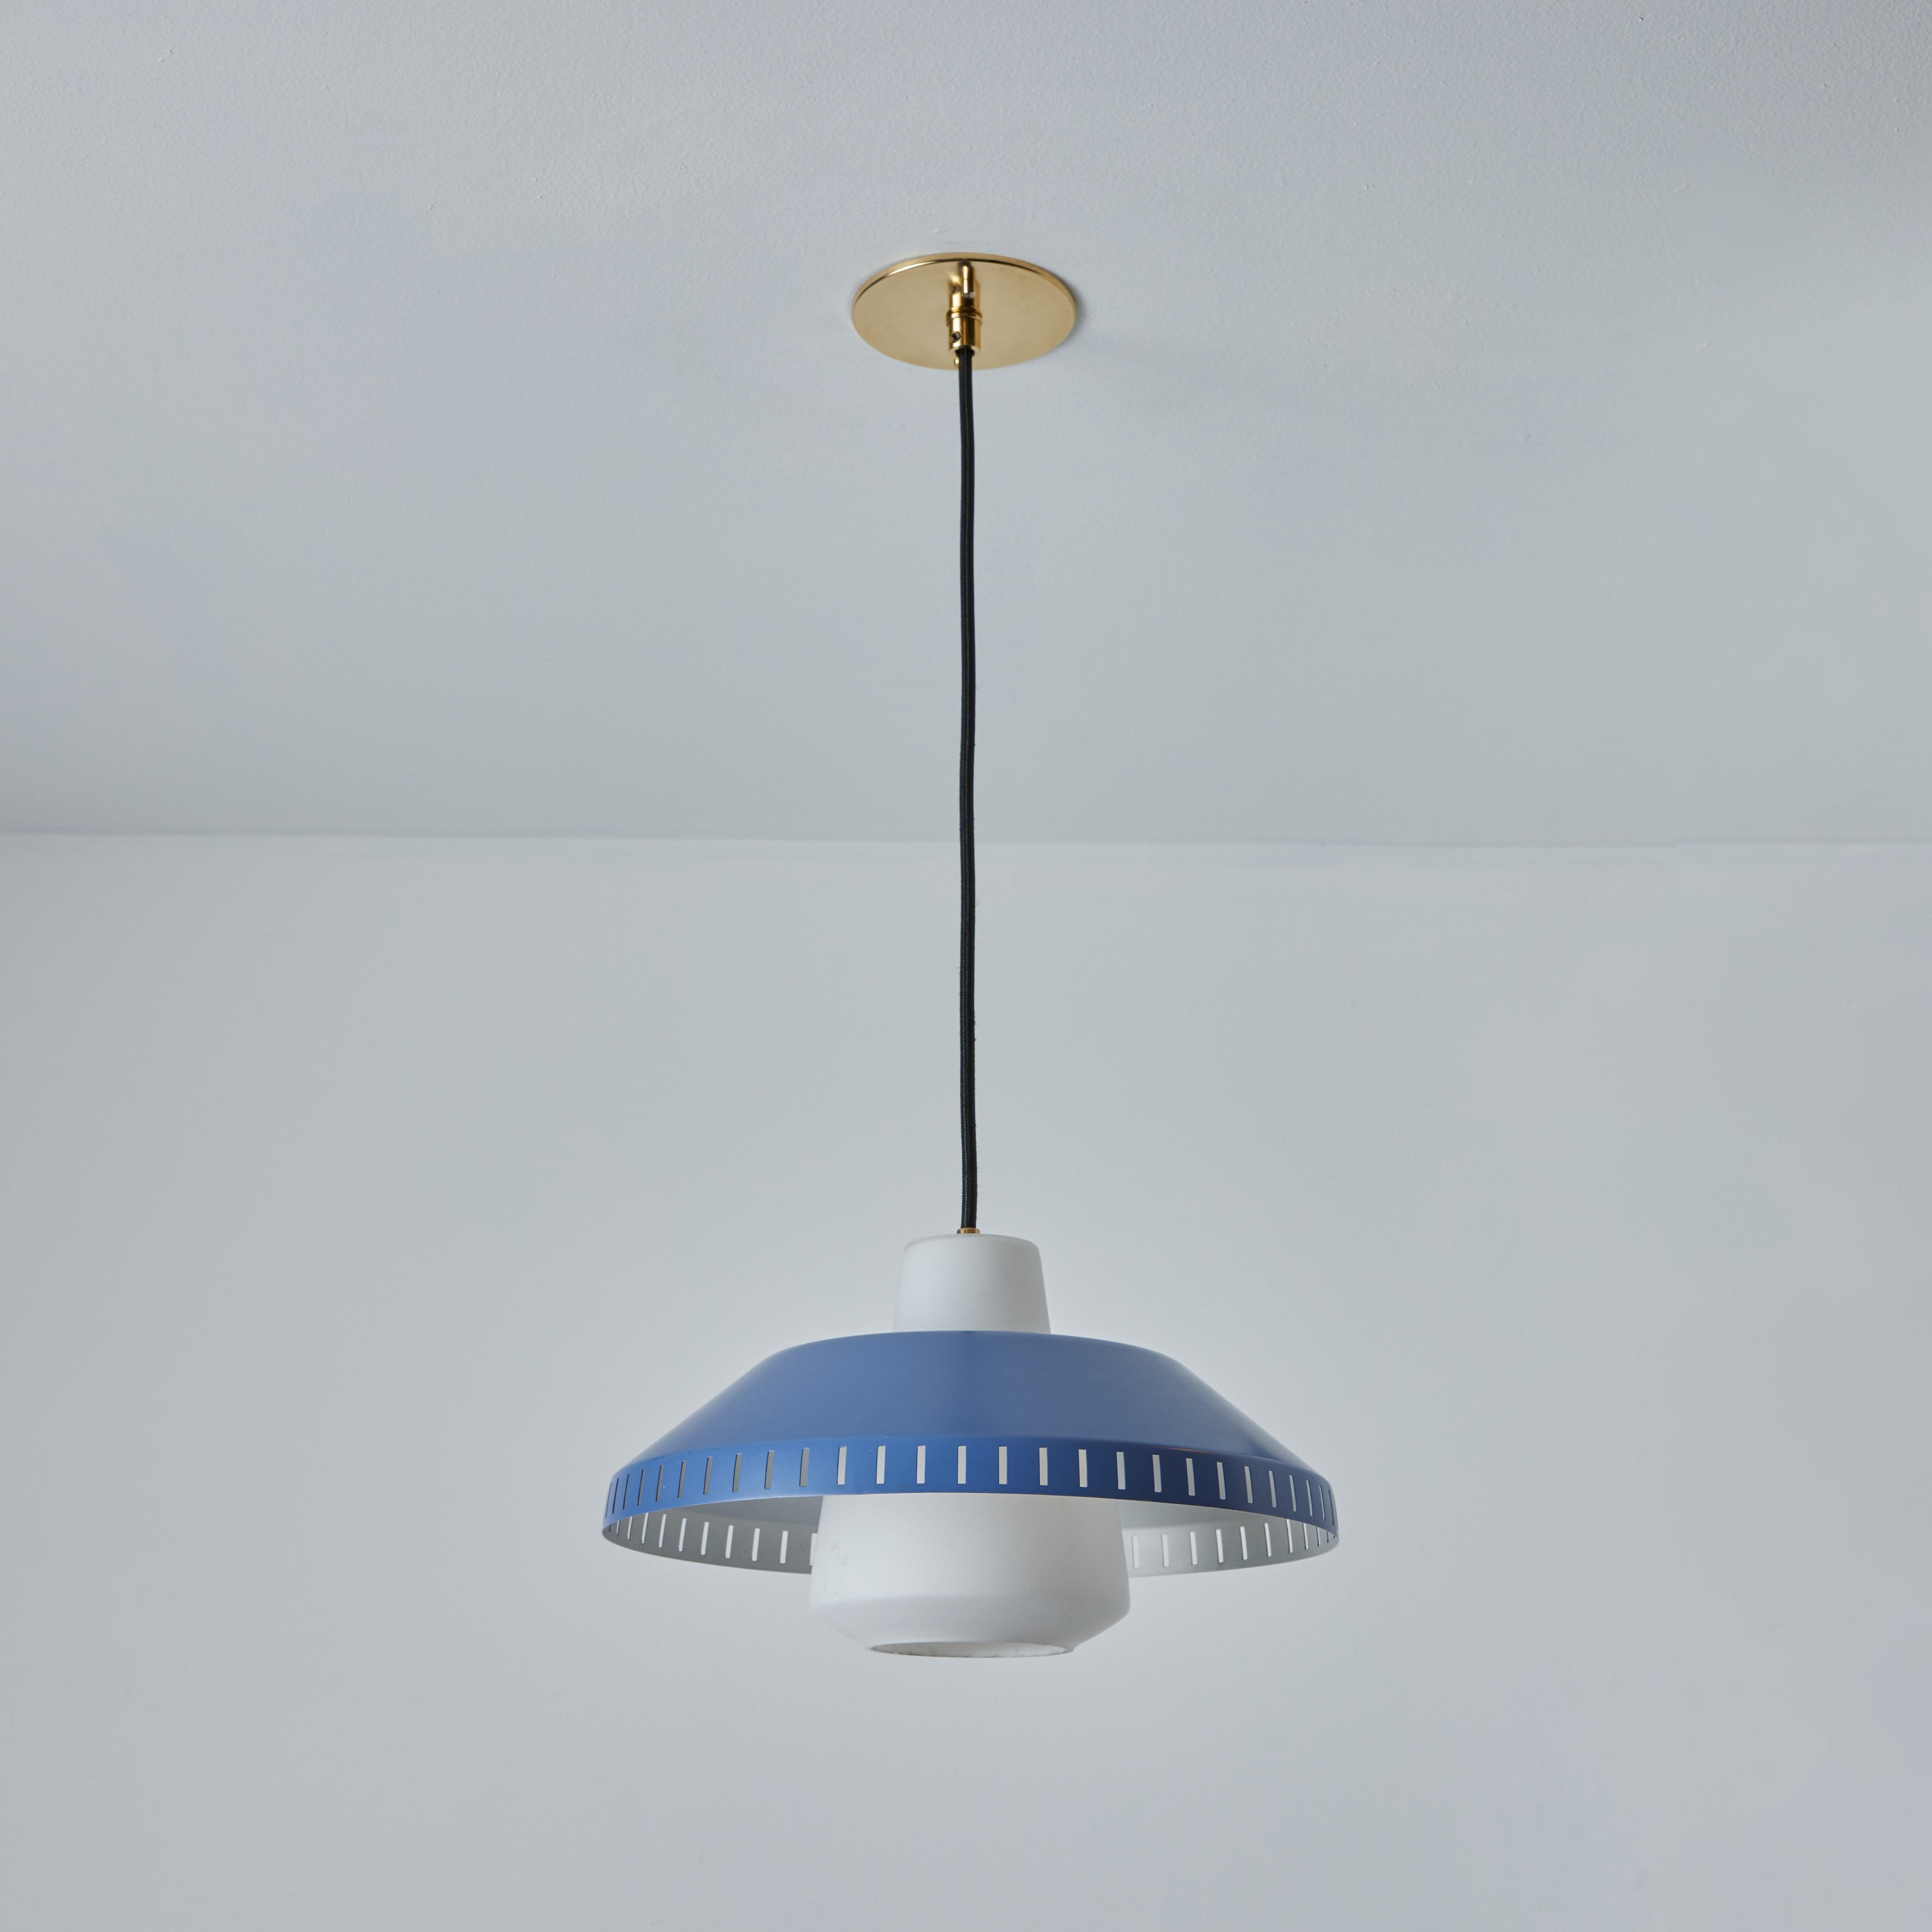 1960s Blue metal and opaline glass pendant attributed to Lisa Johansson-Pape. Executed in blown opaline glass and blue painted metal.

A contemporary of Paavo Tynell, the refined work of Lisa Johansson-Pape has made her an increasingly valued